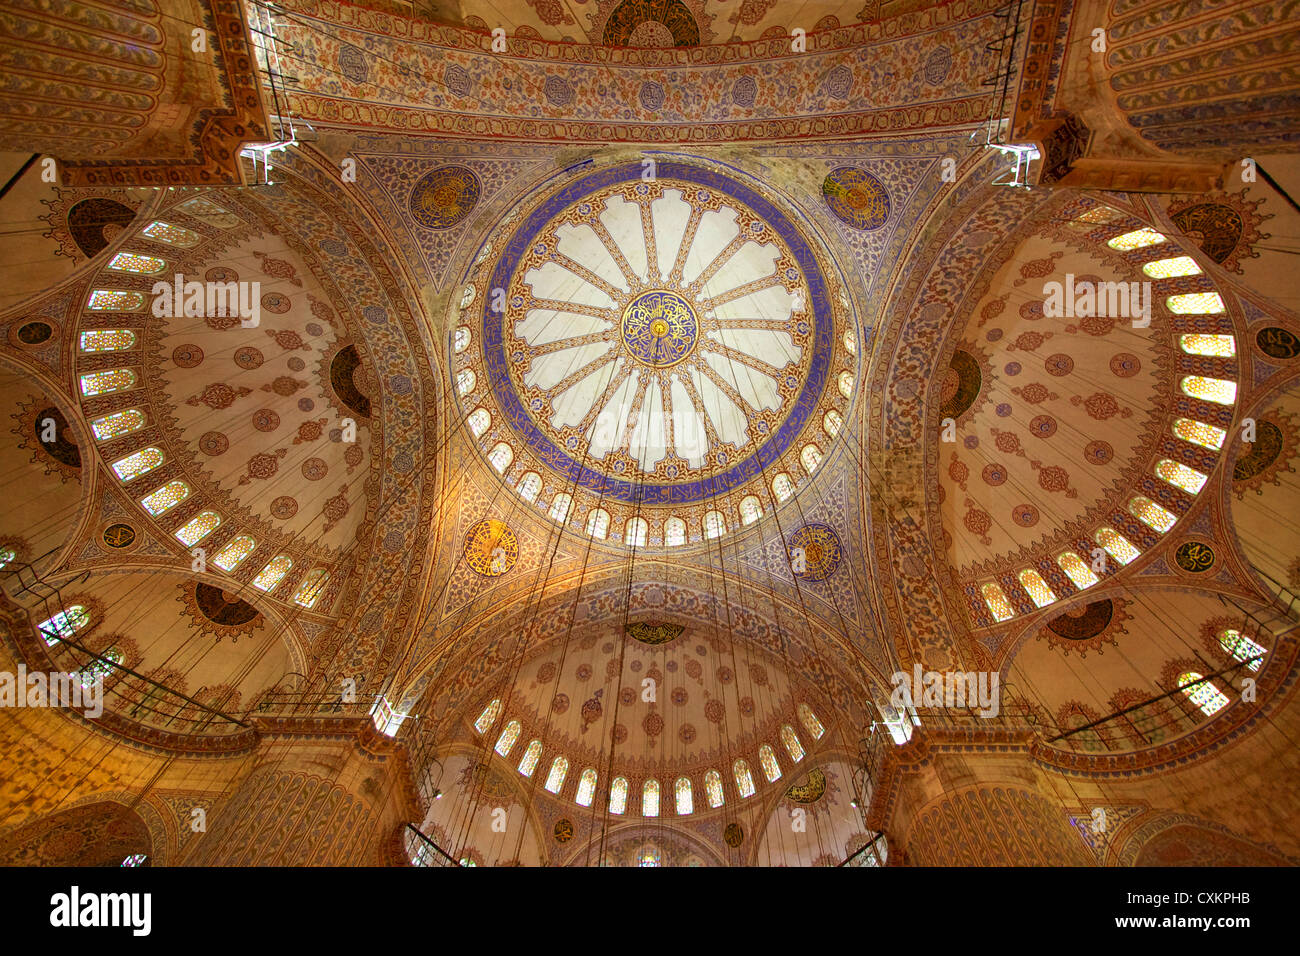 Beautiful Mosaic Interior Art Works Inside Blue Mosque Or